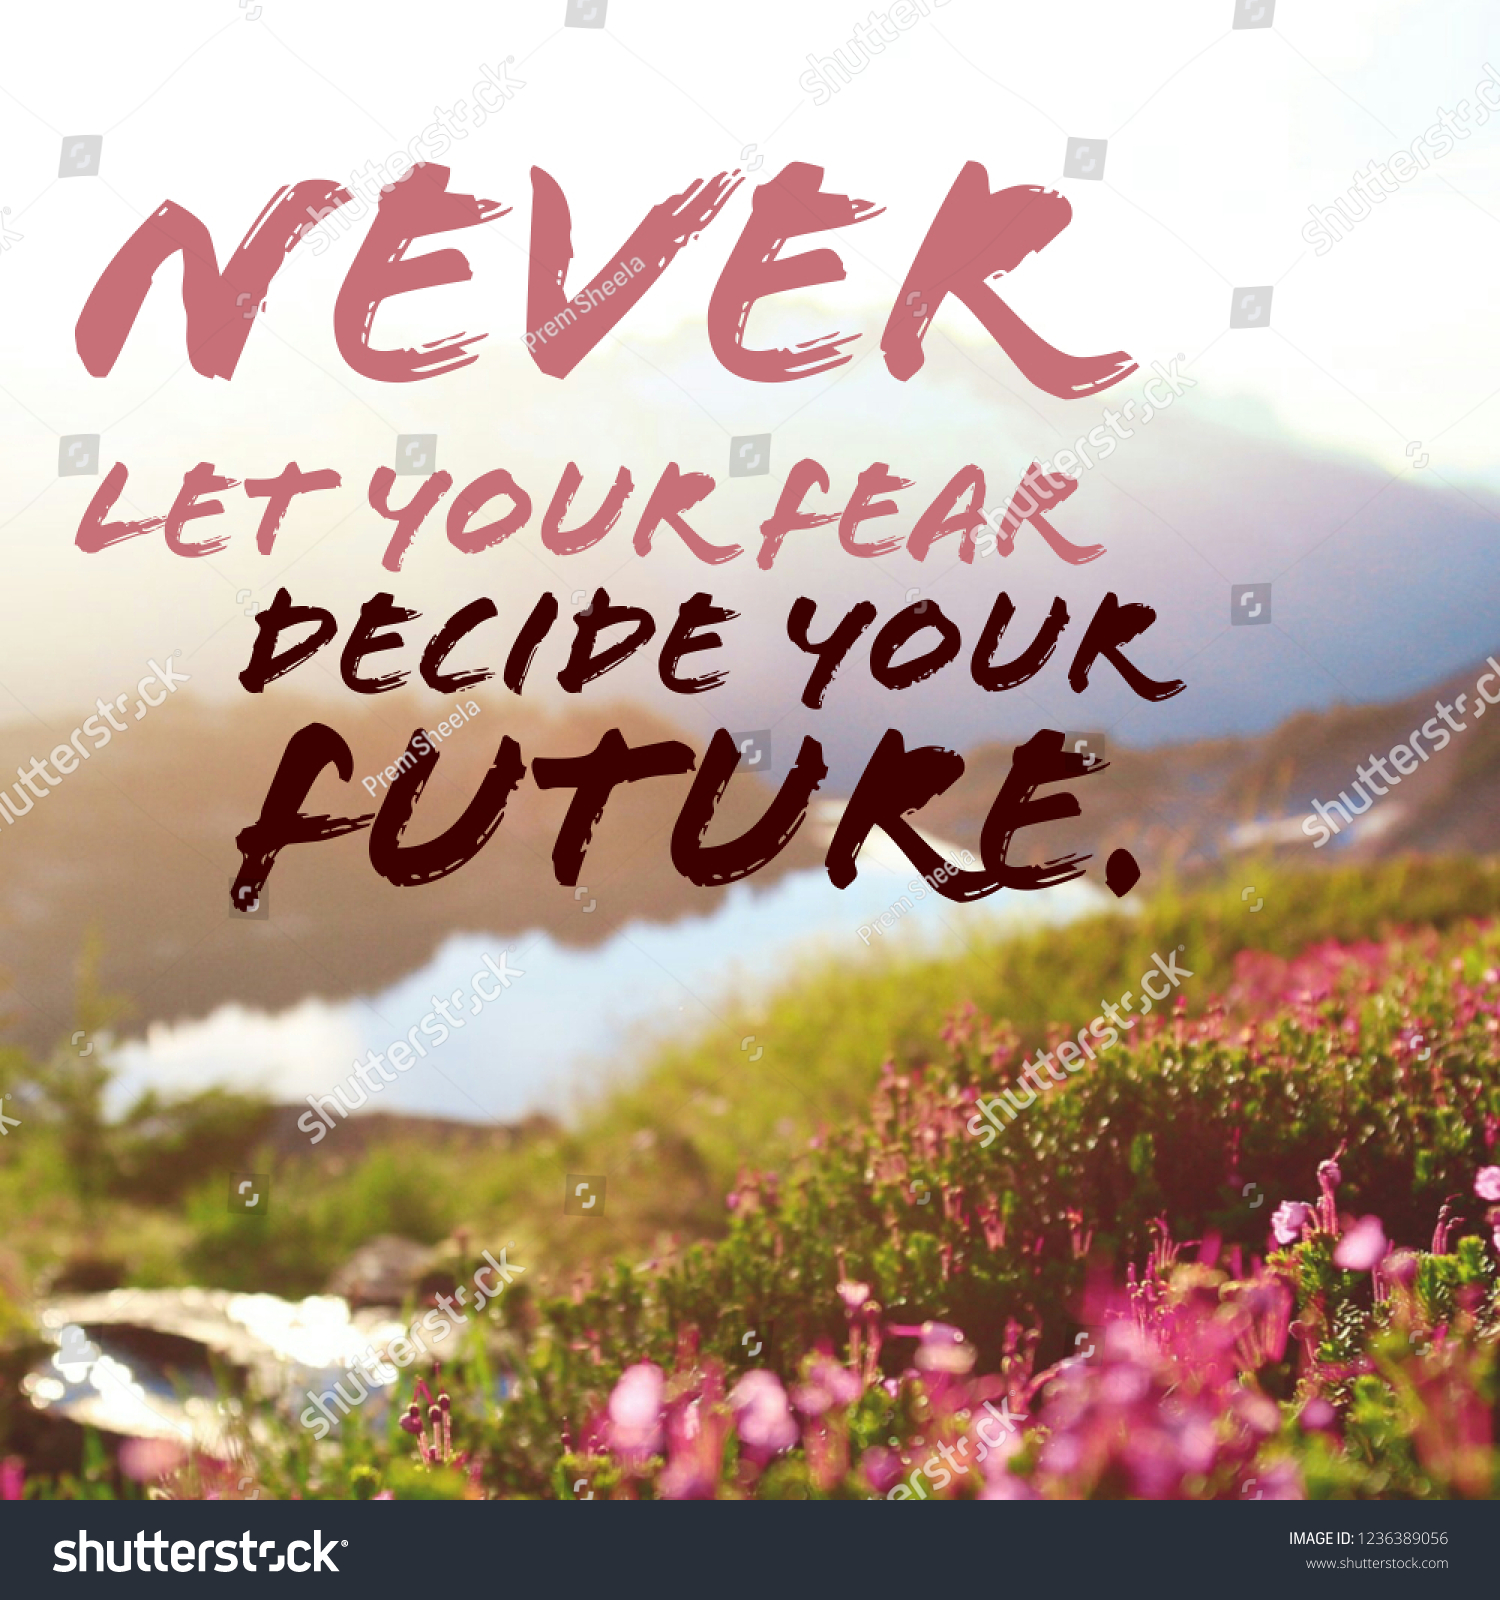 Quote Best Inspirational Motivational Quotes Saying Stock Photo